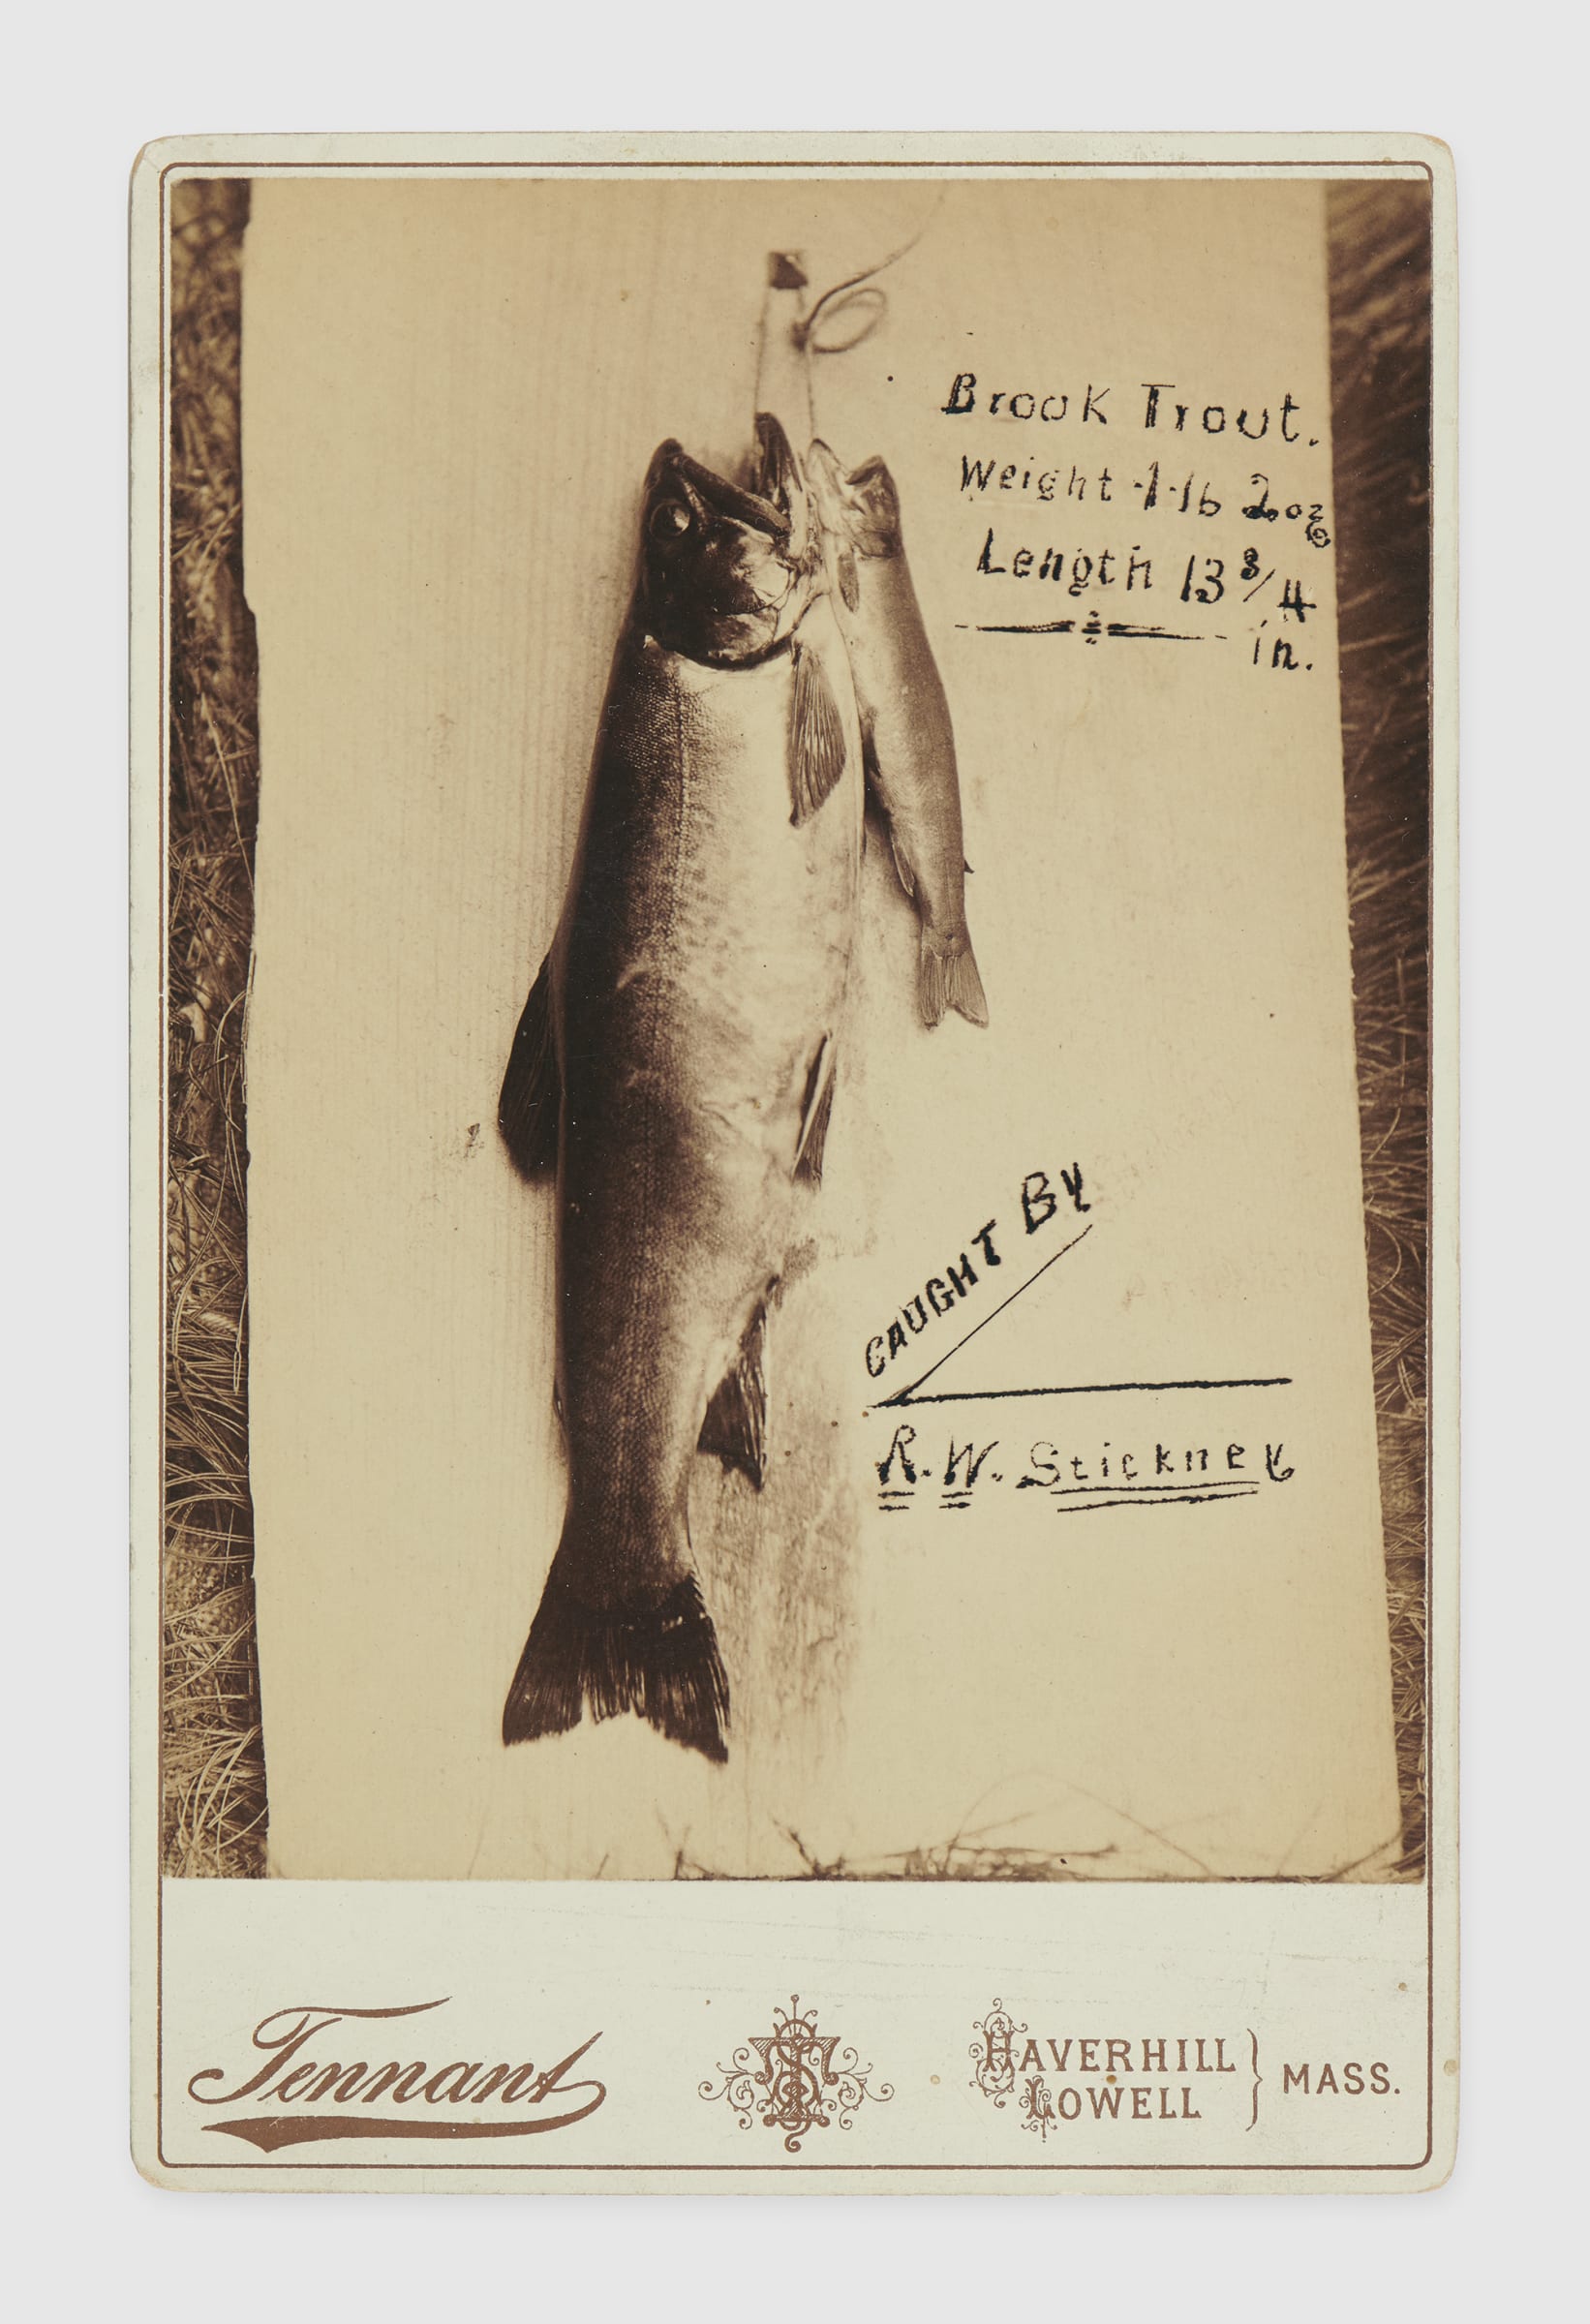 Tennant Photo Studio, Cabinet Card of a Brook Trout Caught by R.W.  Stickney, 1880s